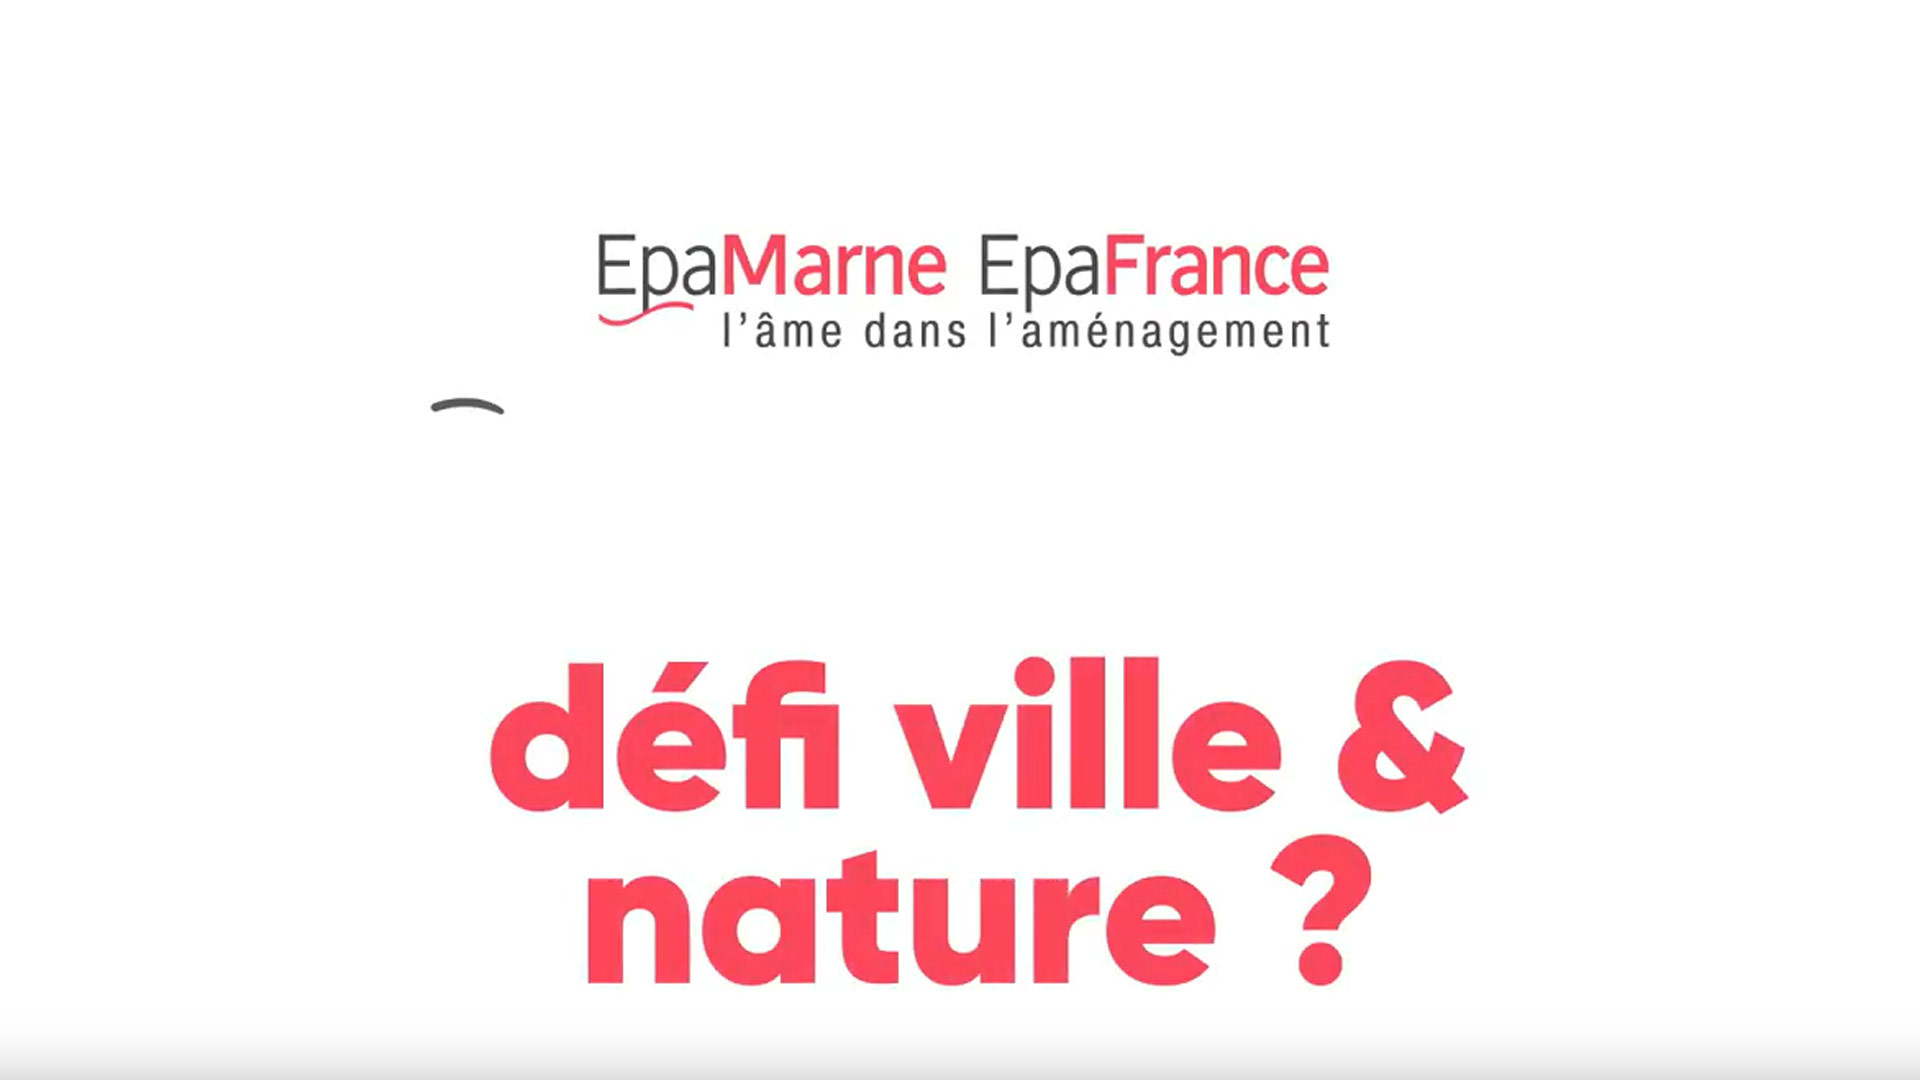 EpaMarne-EpaFrance: Public development agencies committed to sustainable living in the east of Paris